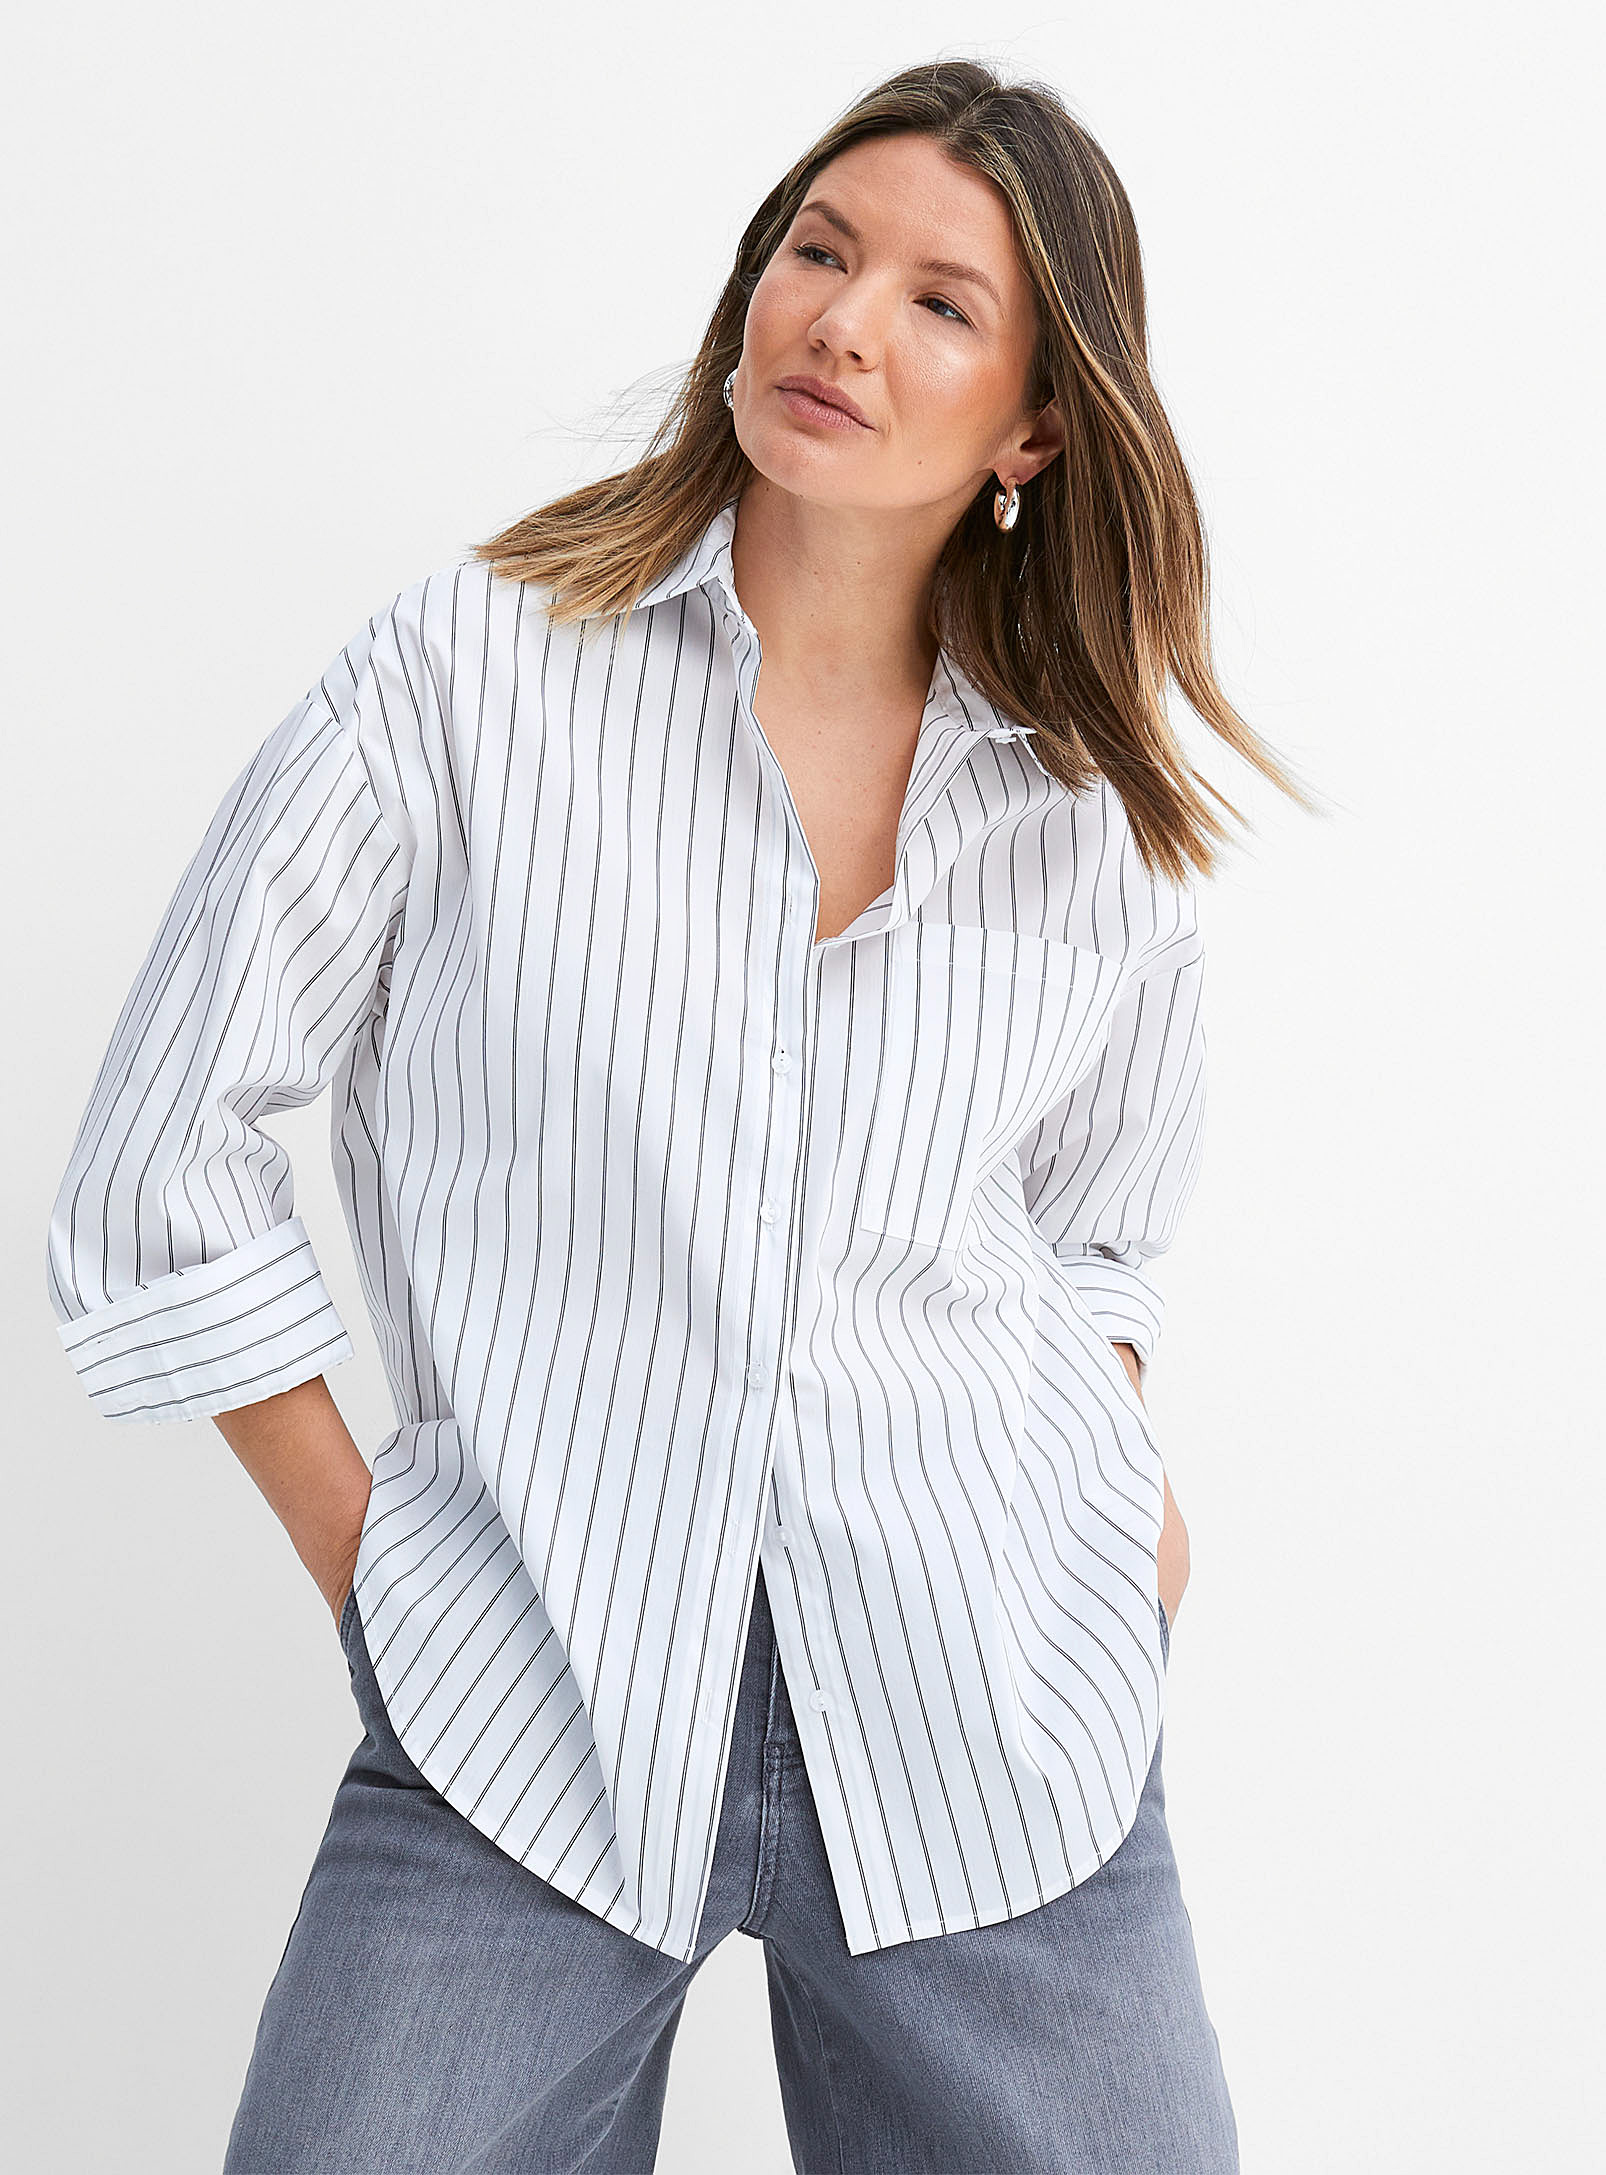 Contemporaine Contrasting Stripes Oversized Shirt In Patterned White